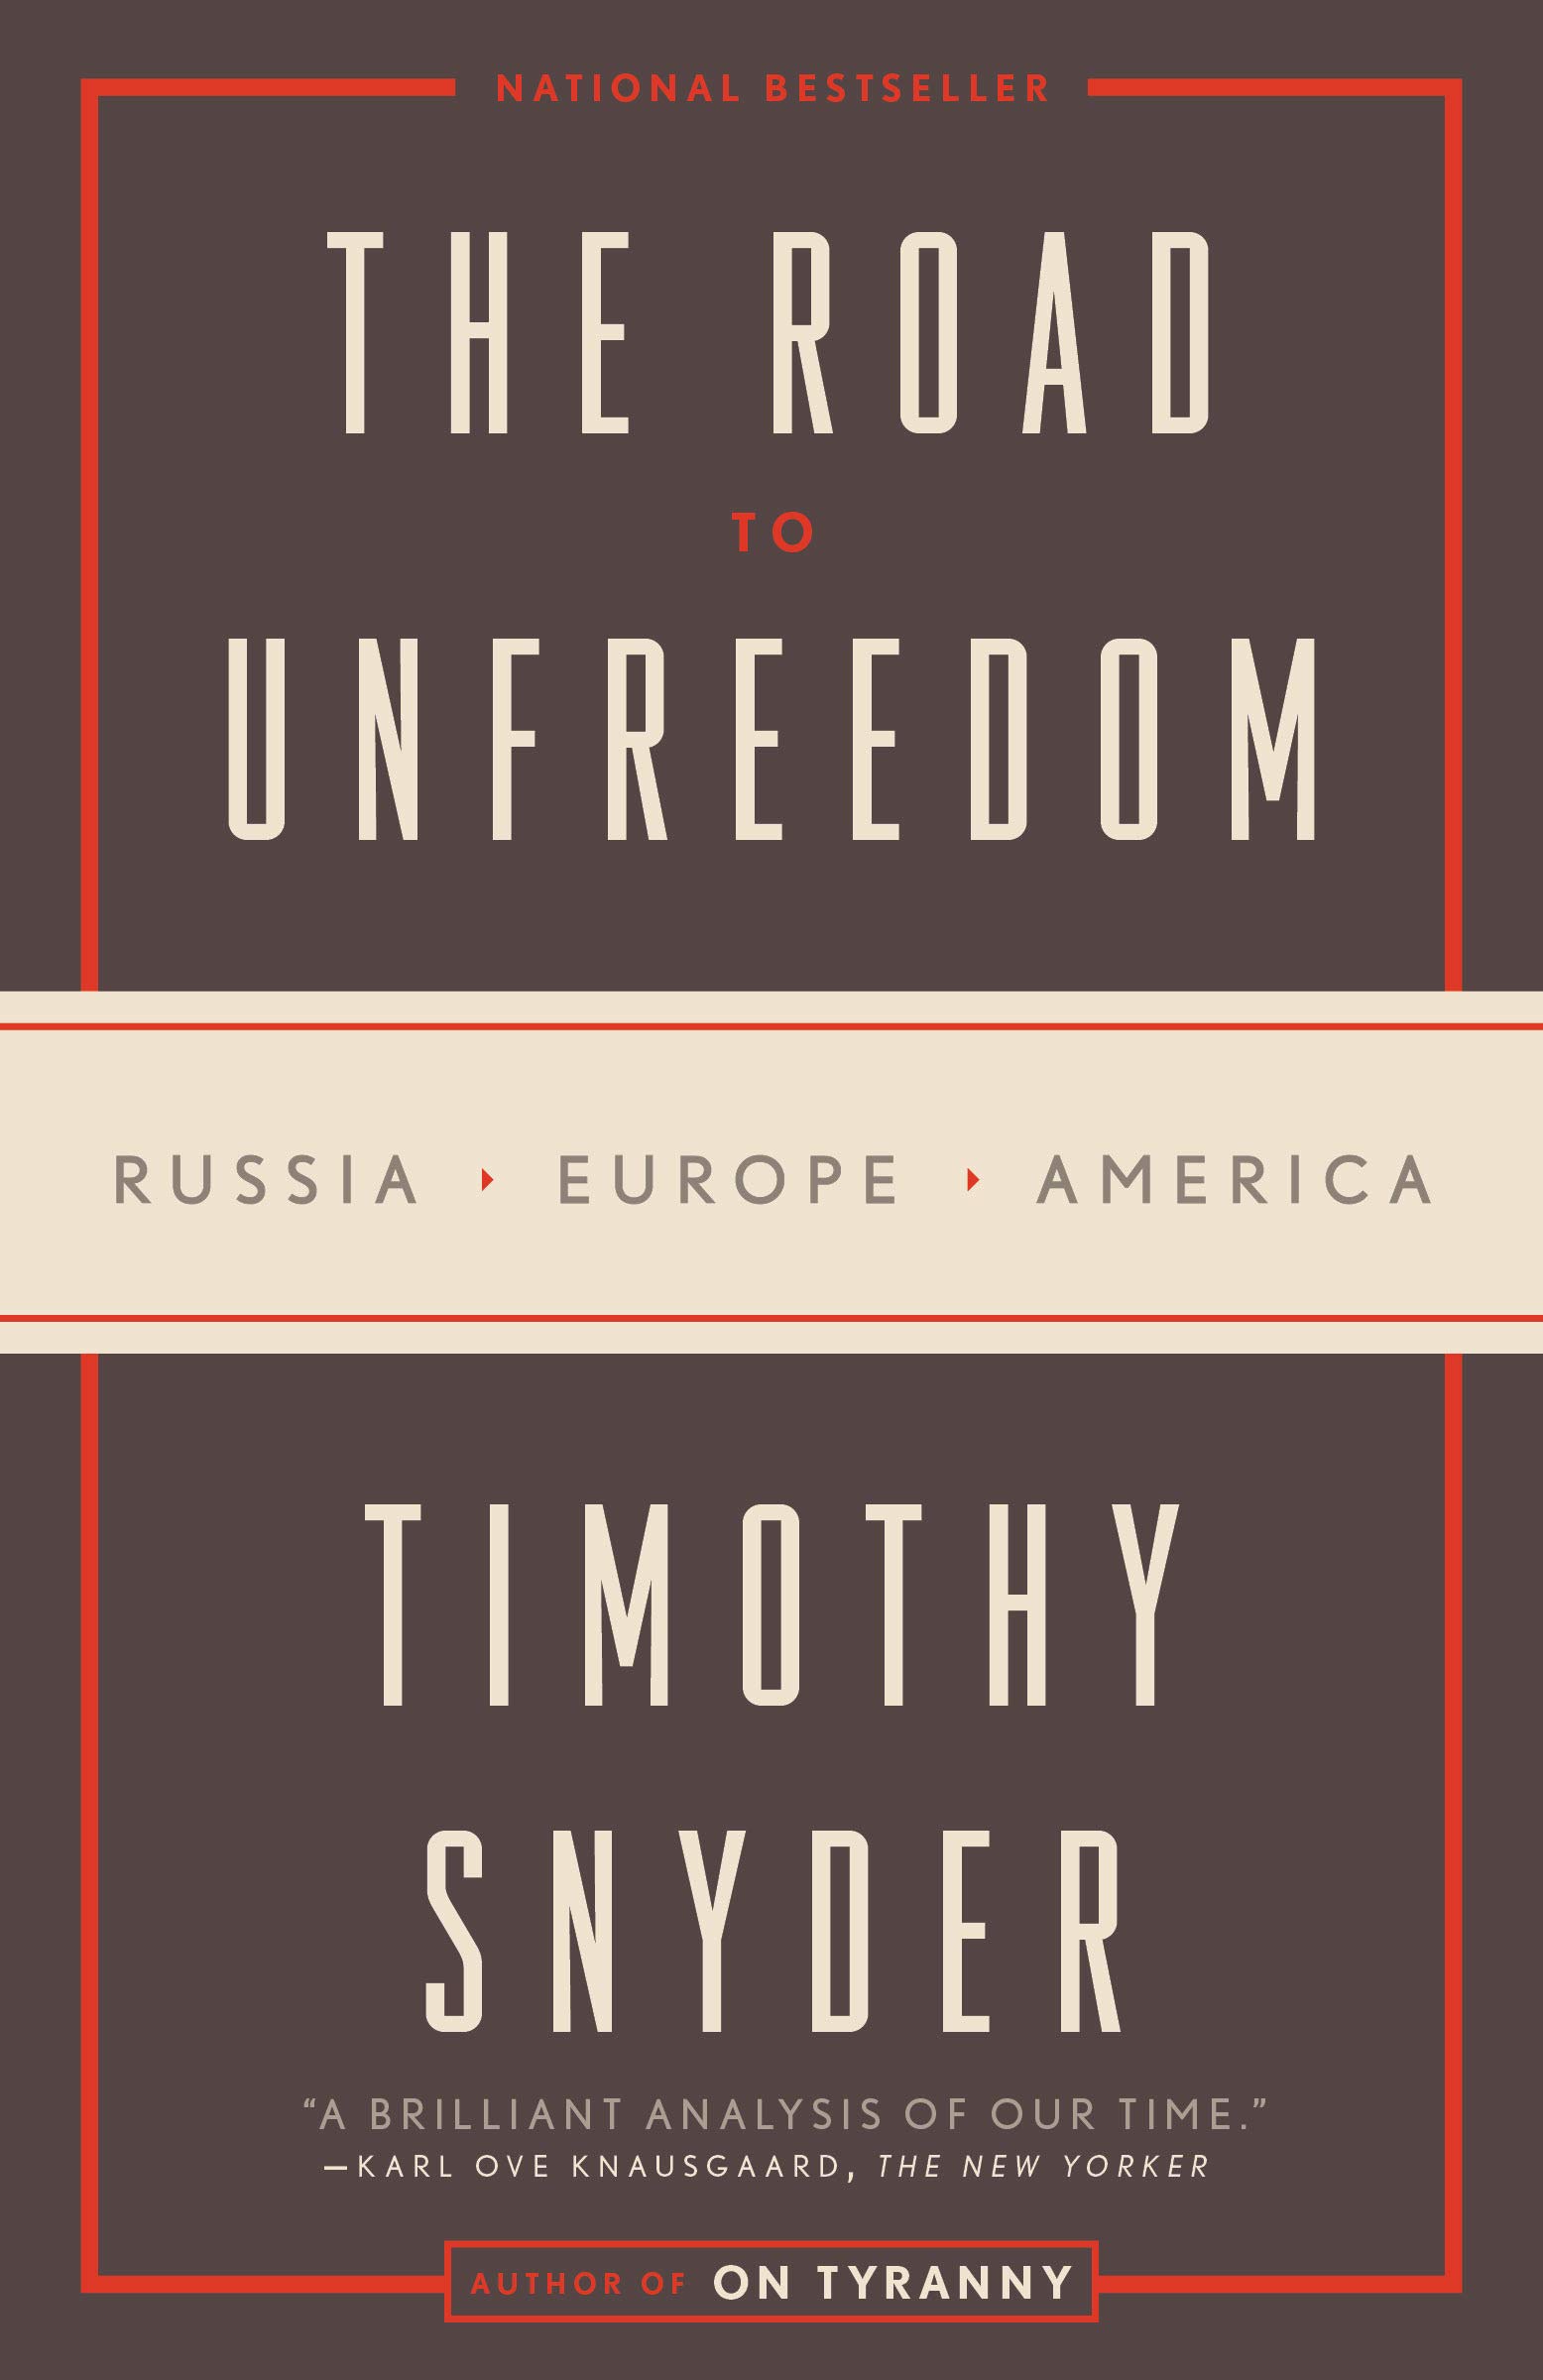 The Road to Unfreedom: Russia, Europe, America (eBook) by Timothy Snyder $2.99